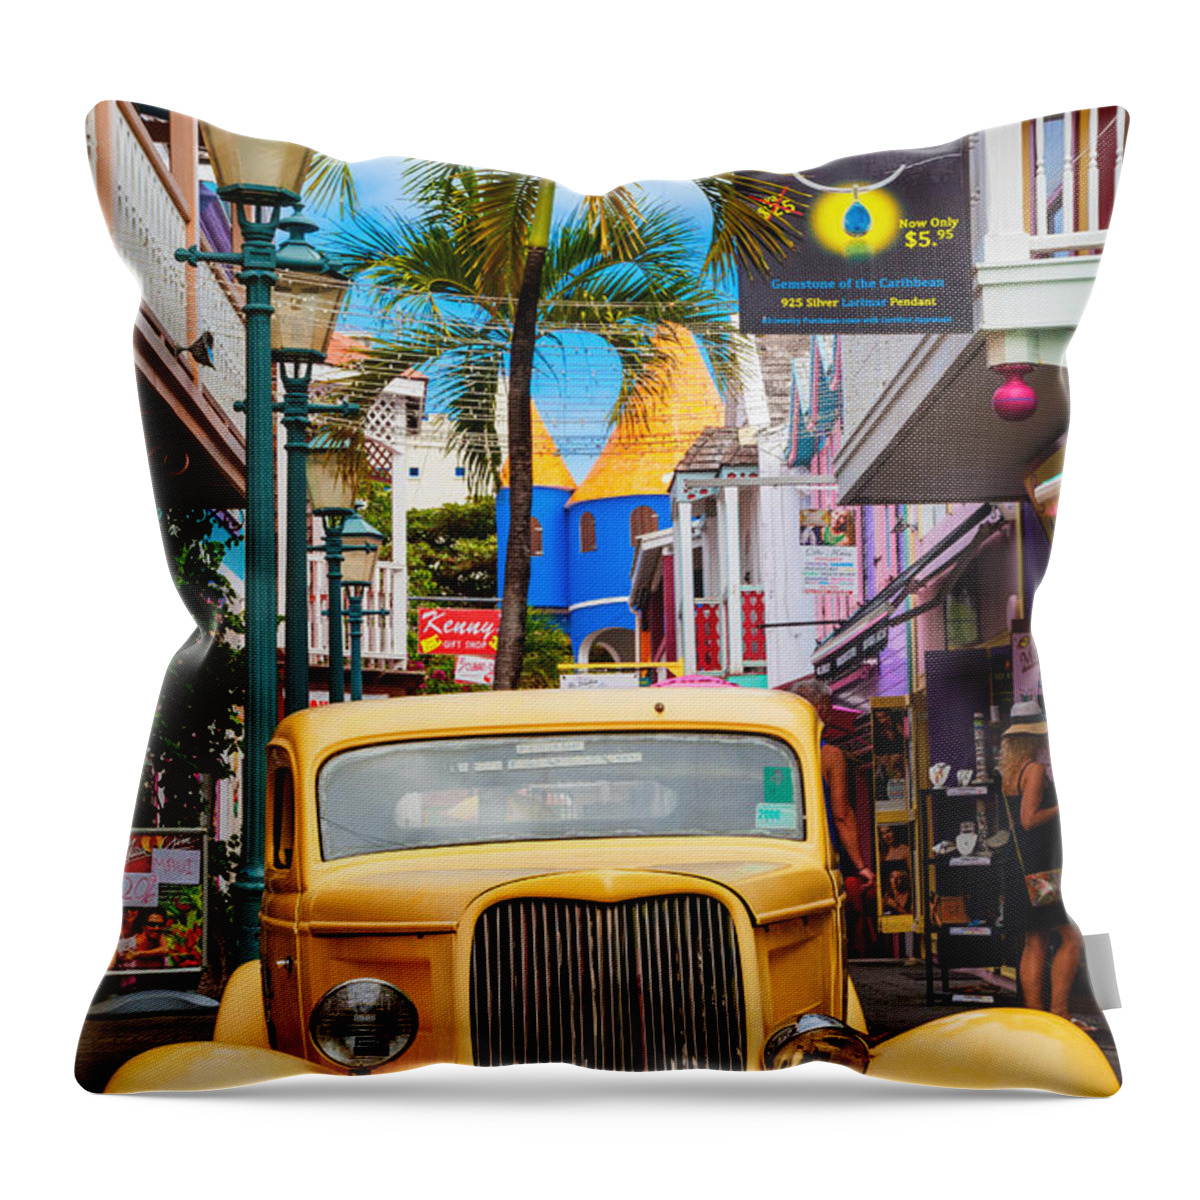 Old Throw Pillow featuring the photograph Old Car On Old Street by Diane Macdonald